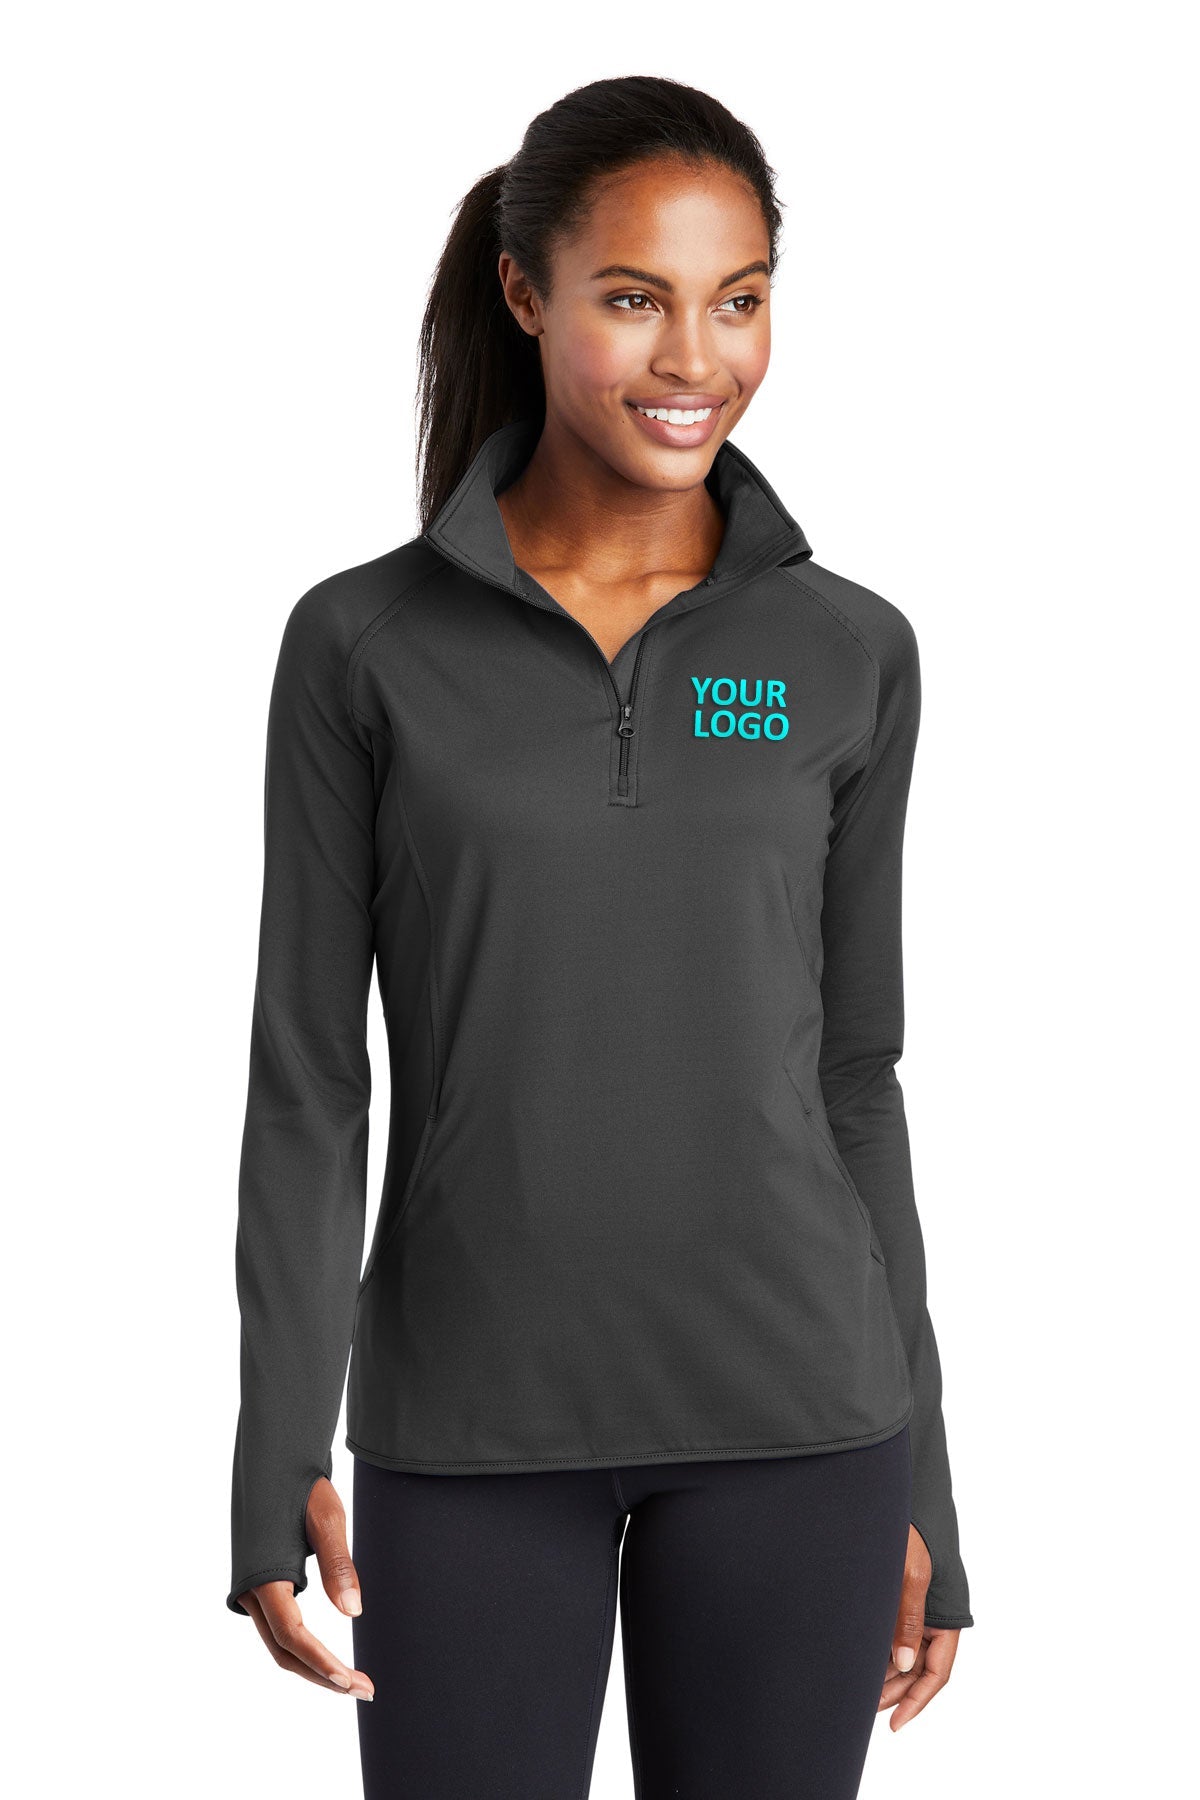 Sport-Tek Charcoal Grey LST850 embroidered sweatshirts for business